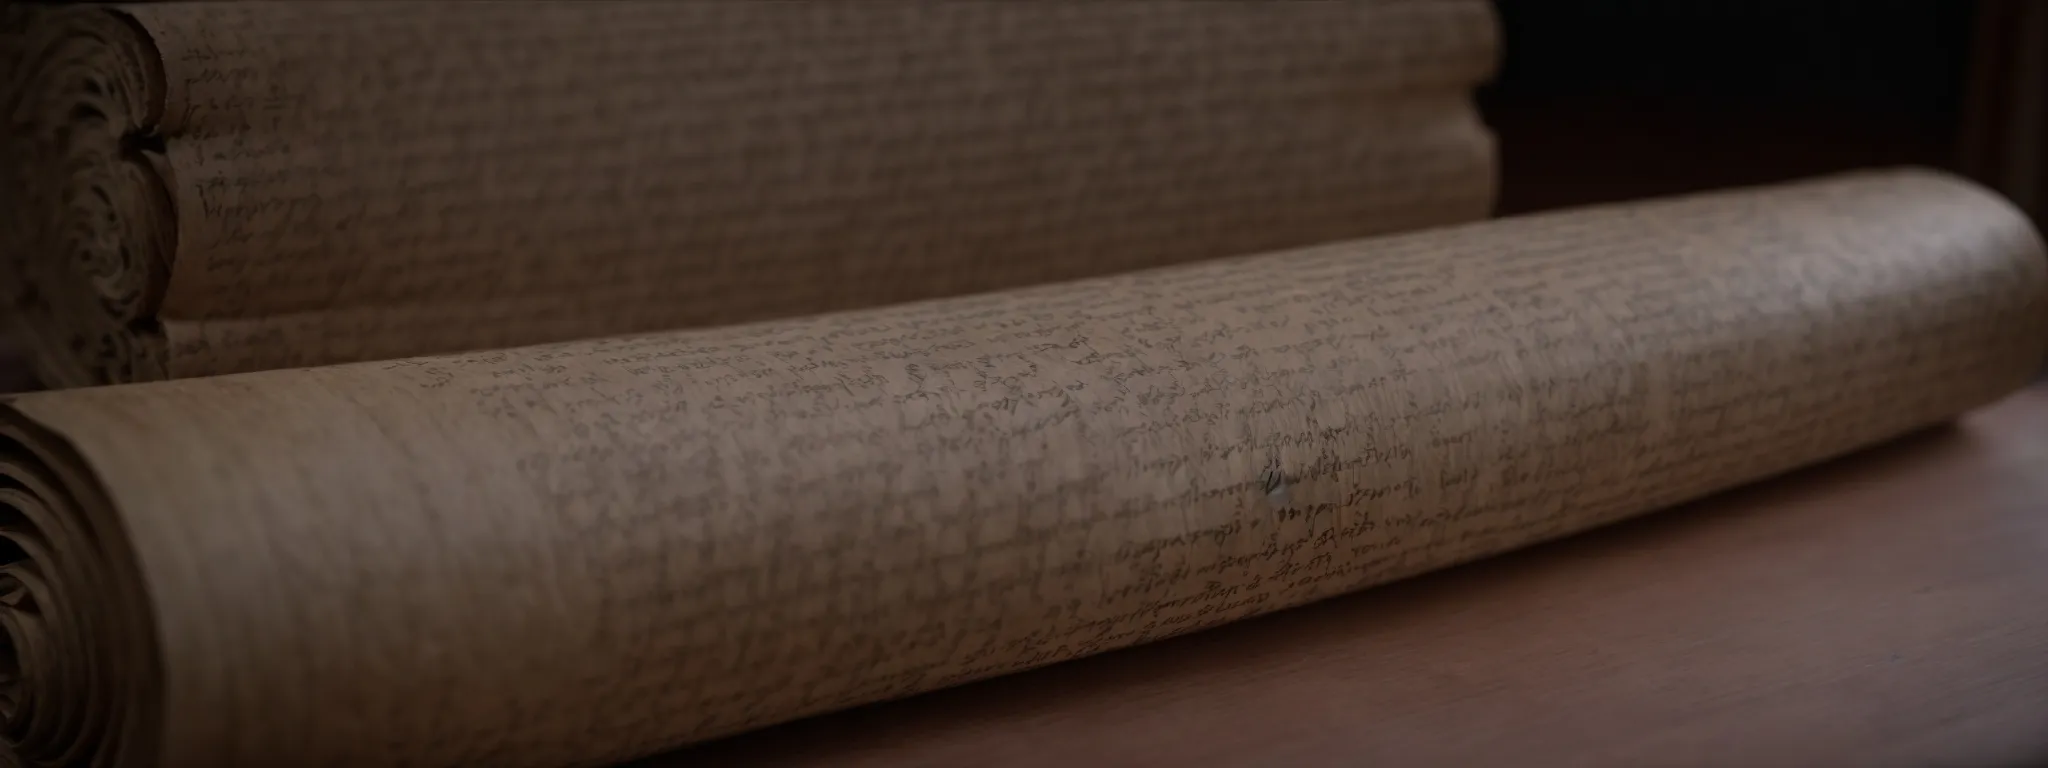 a large, ancient scroll unrolled on a wooden table, illustrating intricate legal texts and contract details against a backdrop of a grand, columned courthouse.